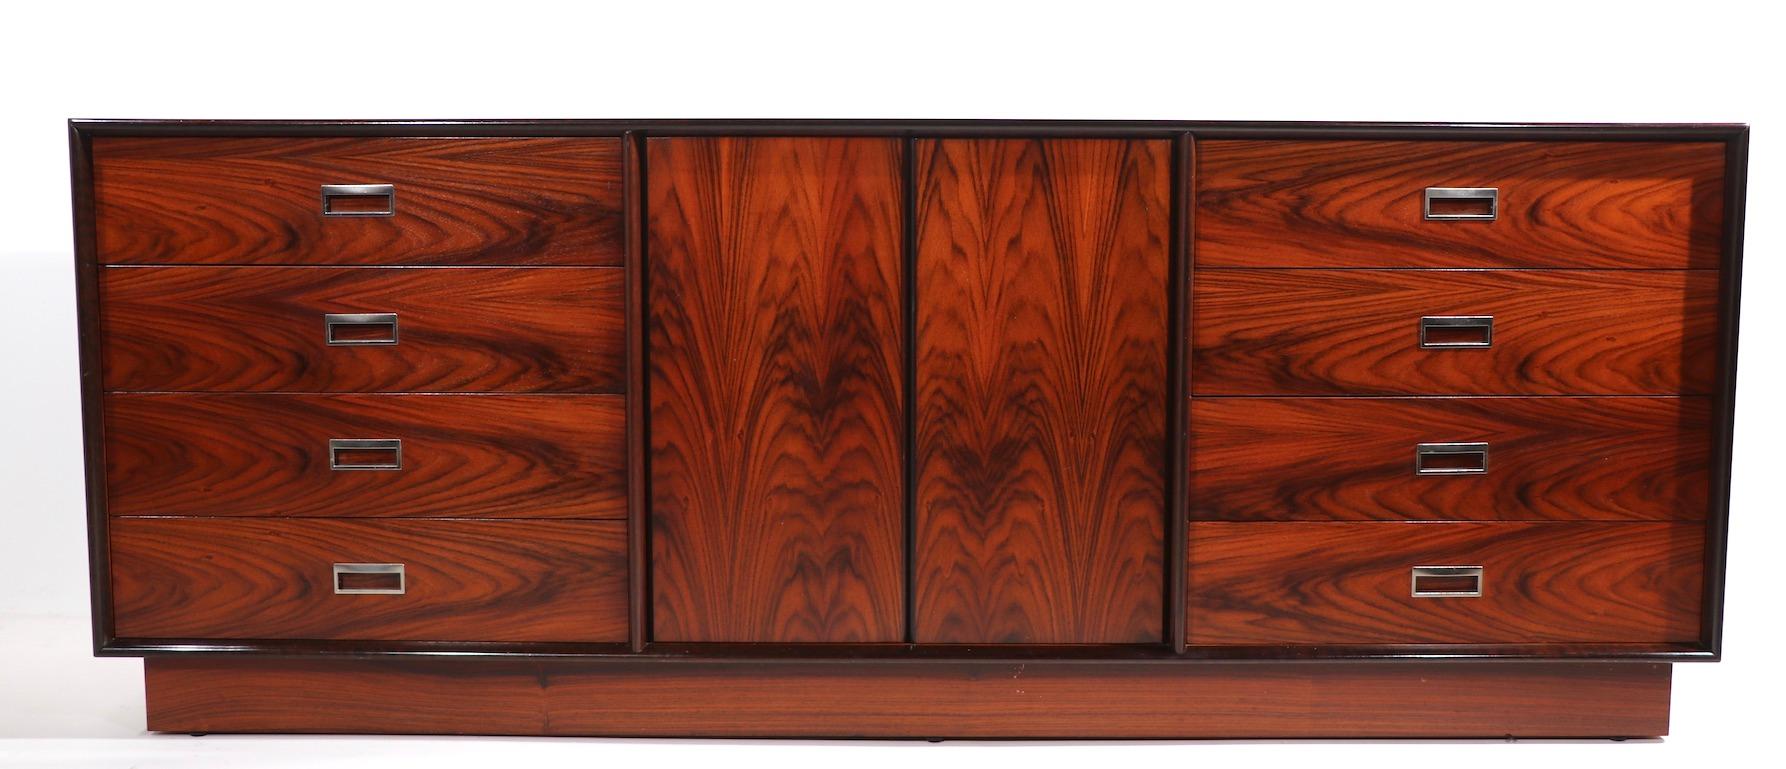 Stunning rosewood dresser, credenza in very fine original condition. The dresser has two banks of 4 drawers, which flank a two door storage space. The chest is on a plinth base, and has chrome trim handles. Rich, vibrant veneer creates impressive